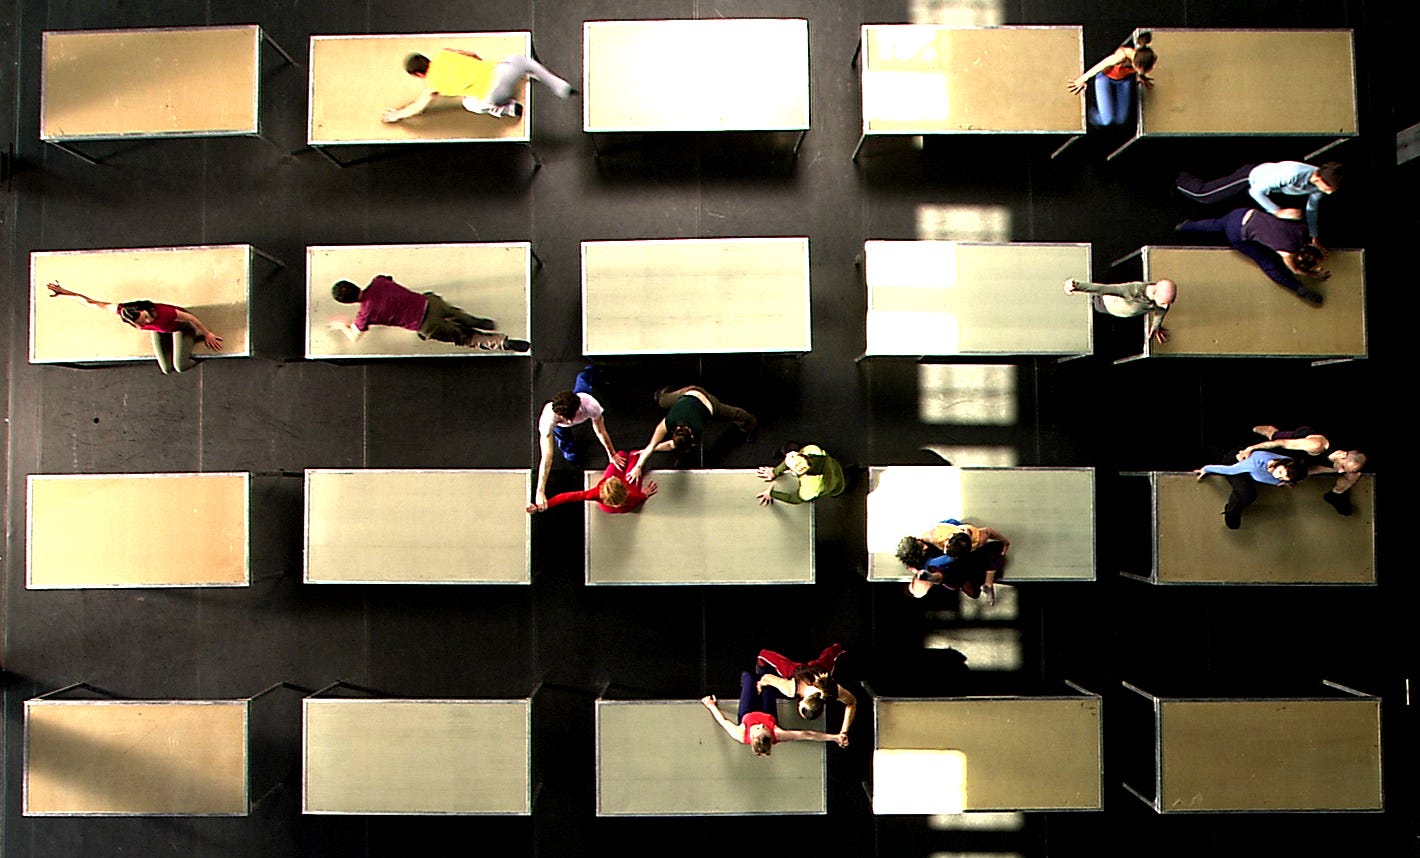 A still from One flat thing, reproduced (2000) by W. Forsythe